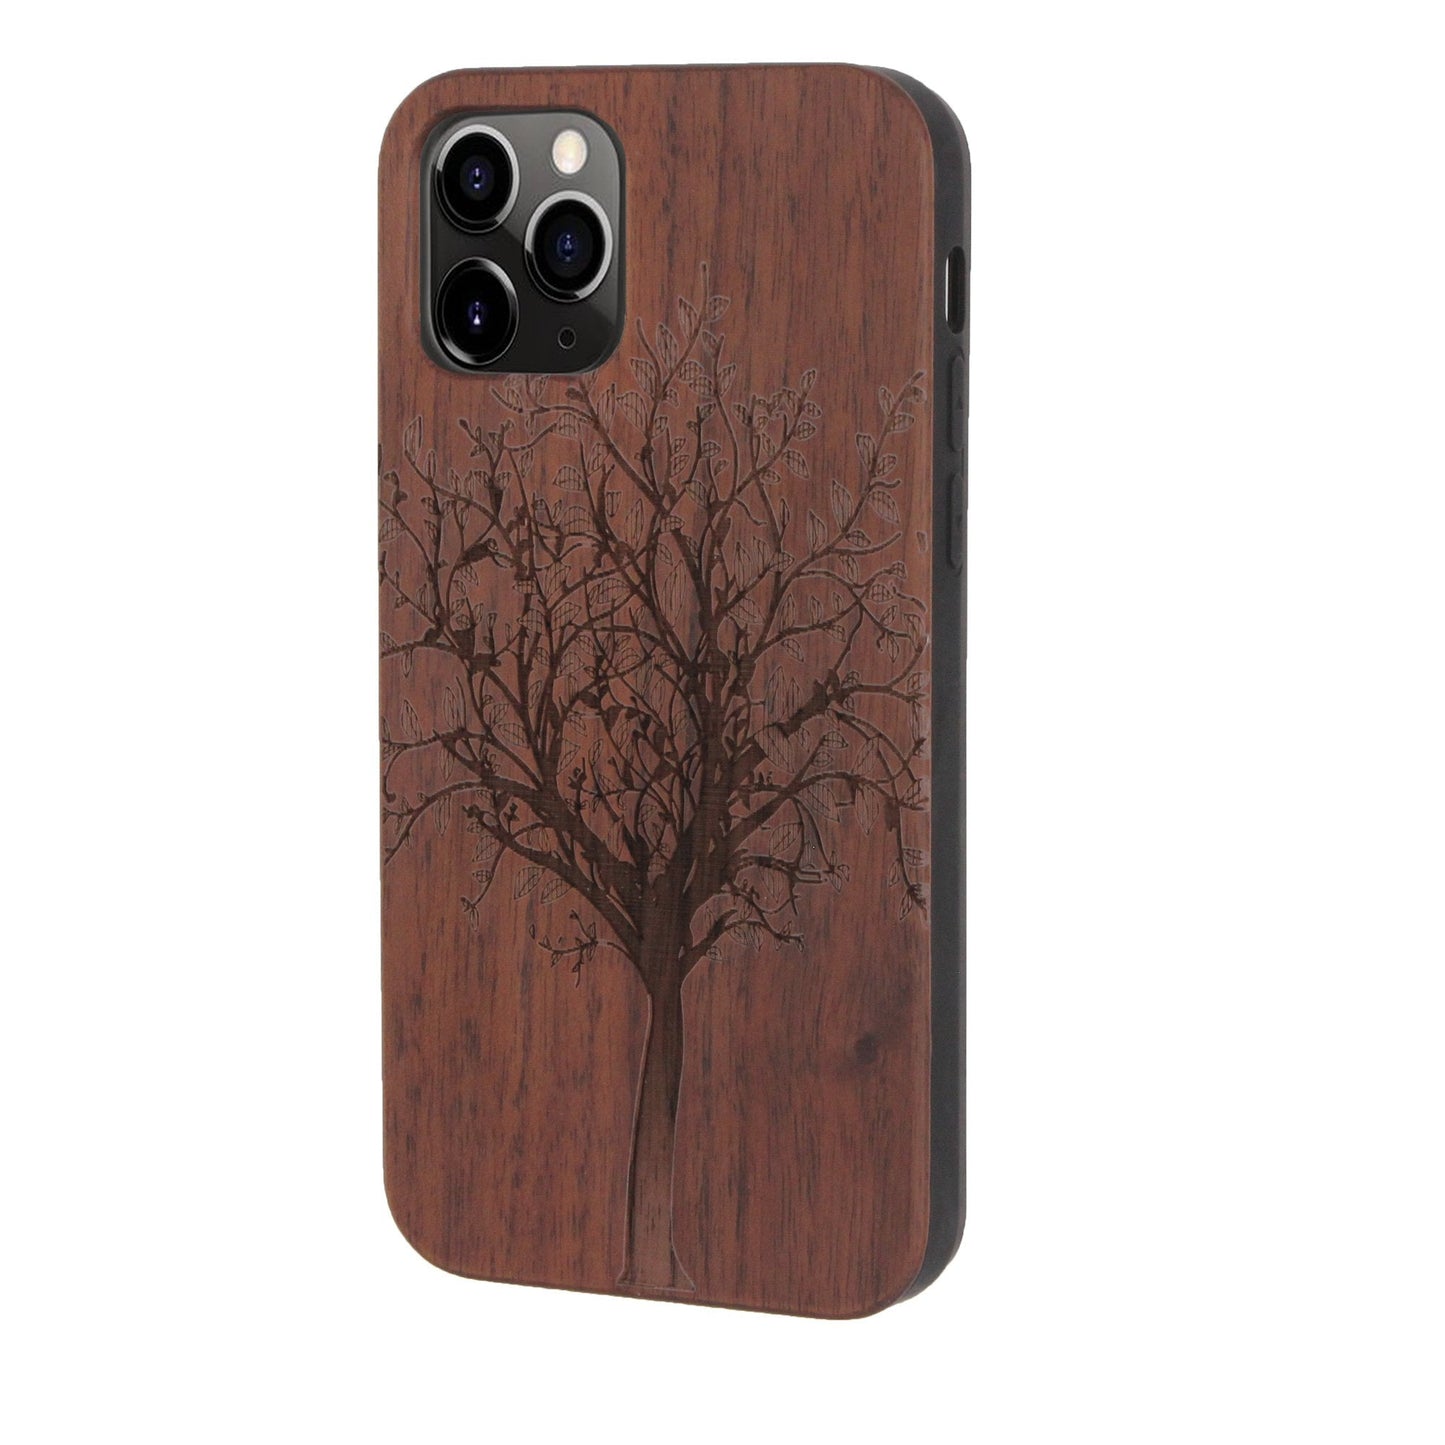 Lebensbaum Eden case made of walnut wood for iPhone 11 Pro Max